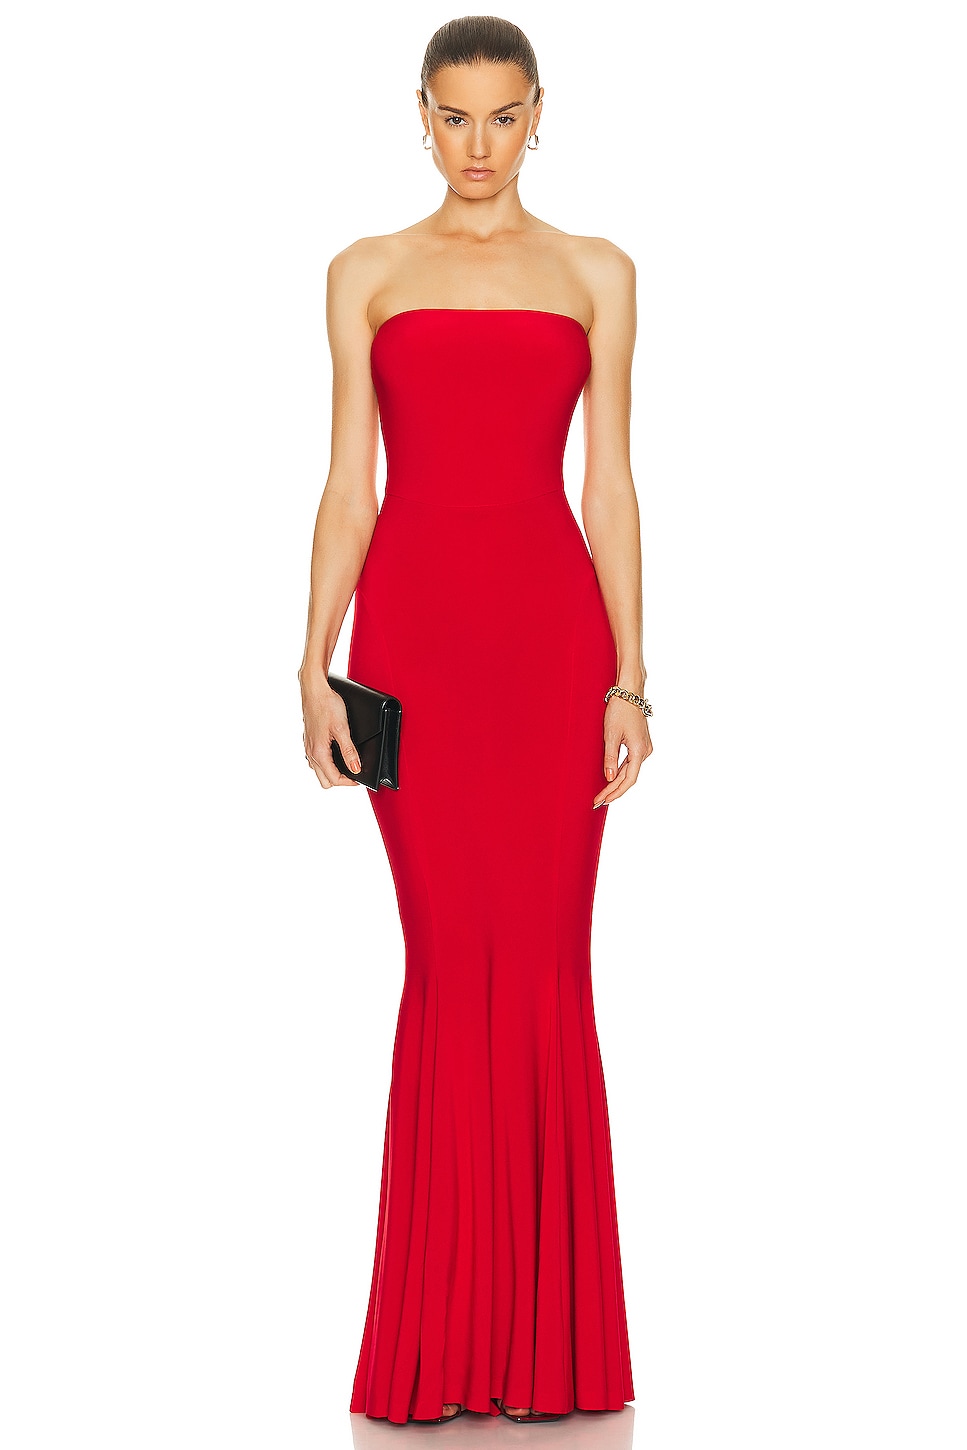 Платье Norma Kamali Strapless Fishtail Gown, цвет Tiger Red